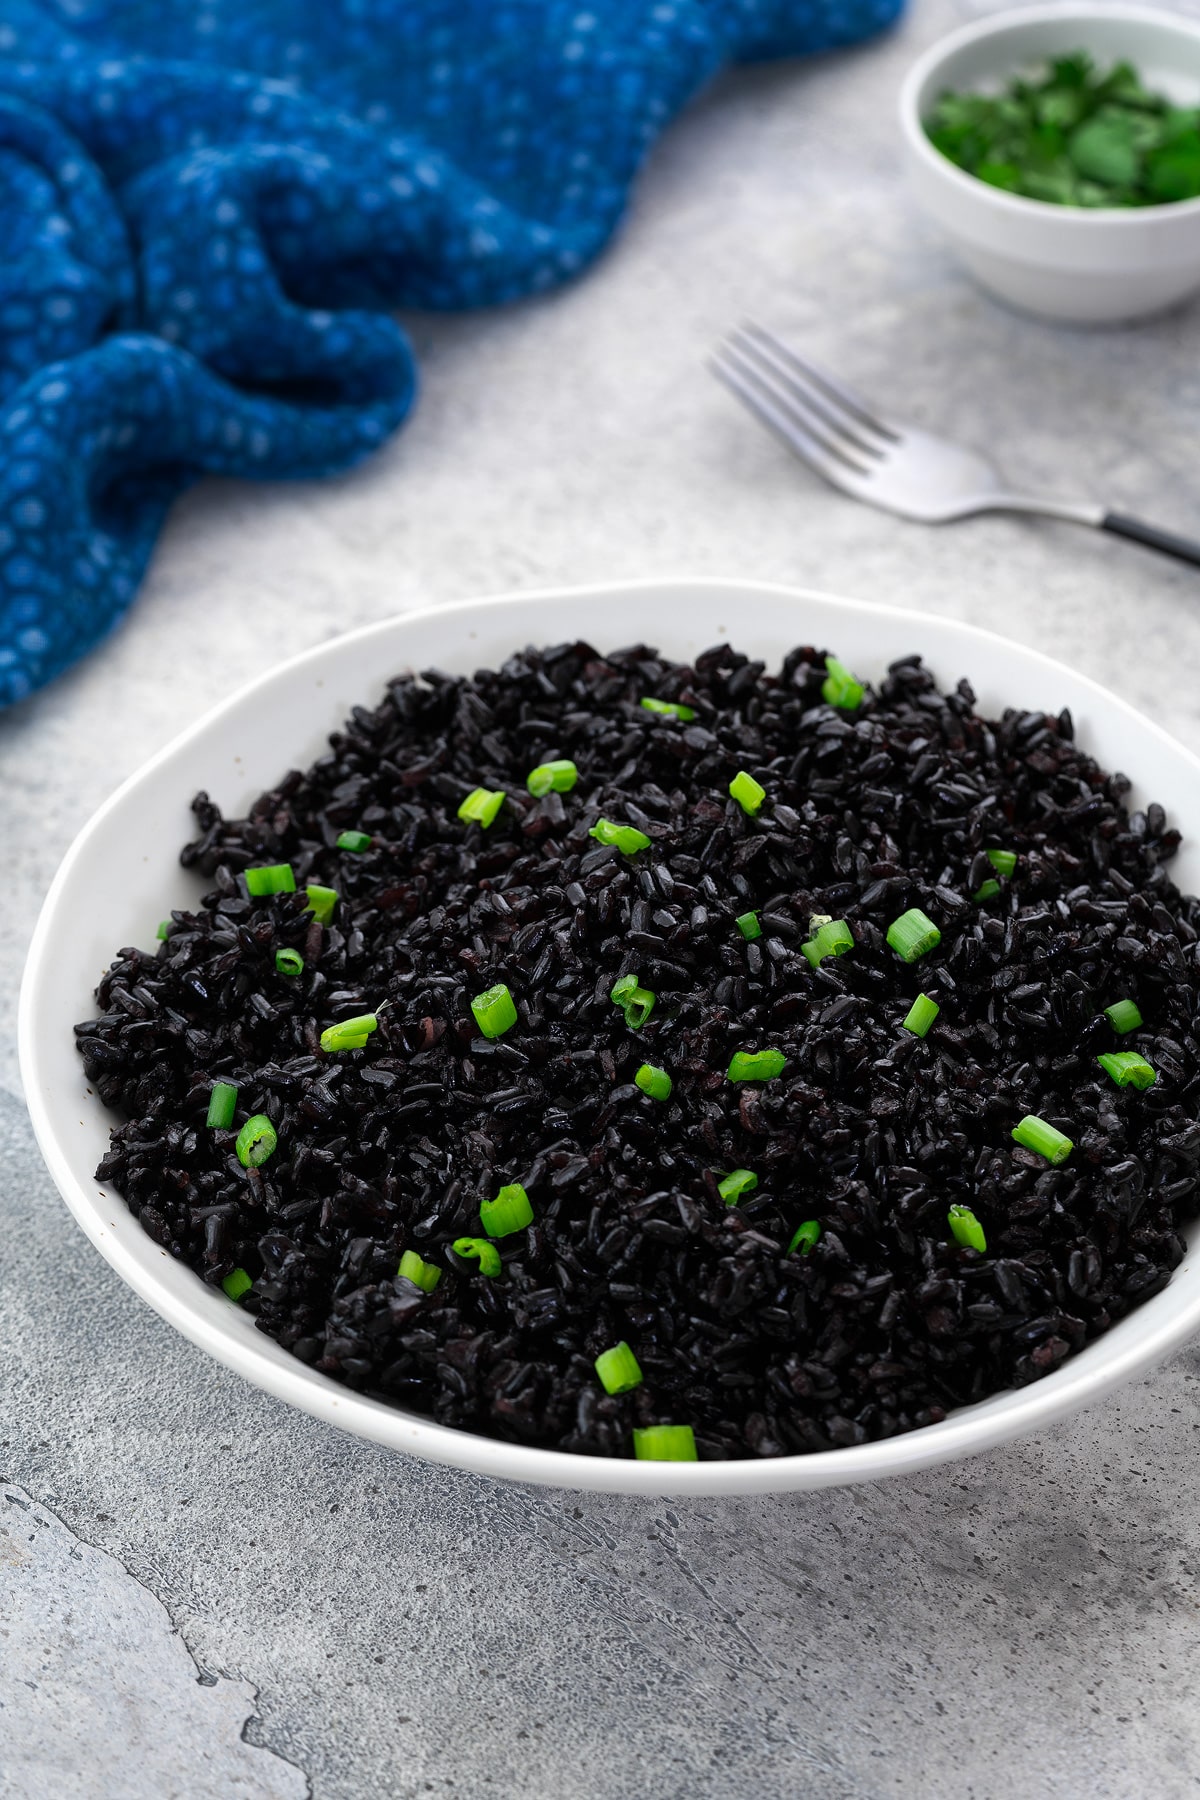 A white bowl of cooked forbidden black rice garnished with spring onion on a white table. Surrounding the bowl are a blue towel, a fork, and a cup of cut spring onion.